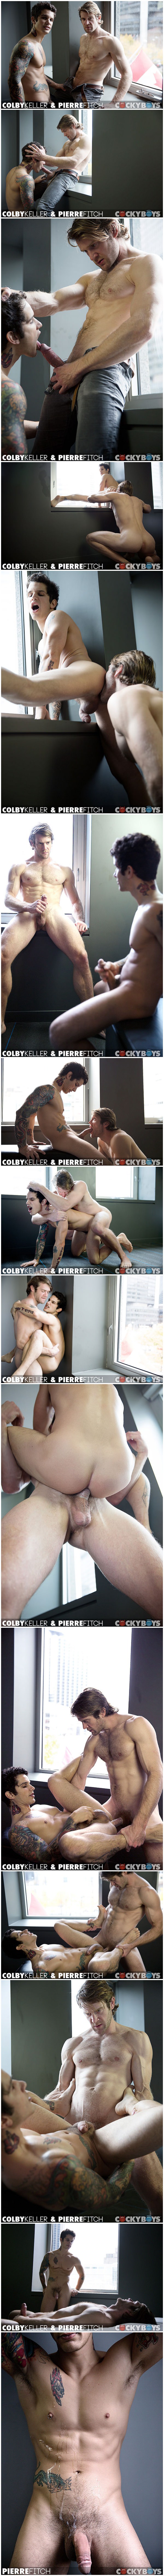 cockyboys-colby-keller-pierre-fitch